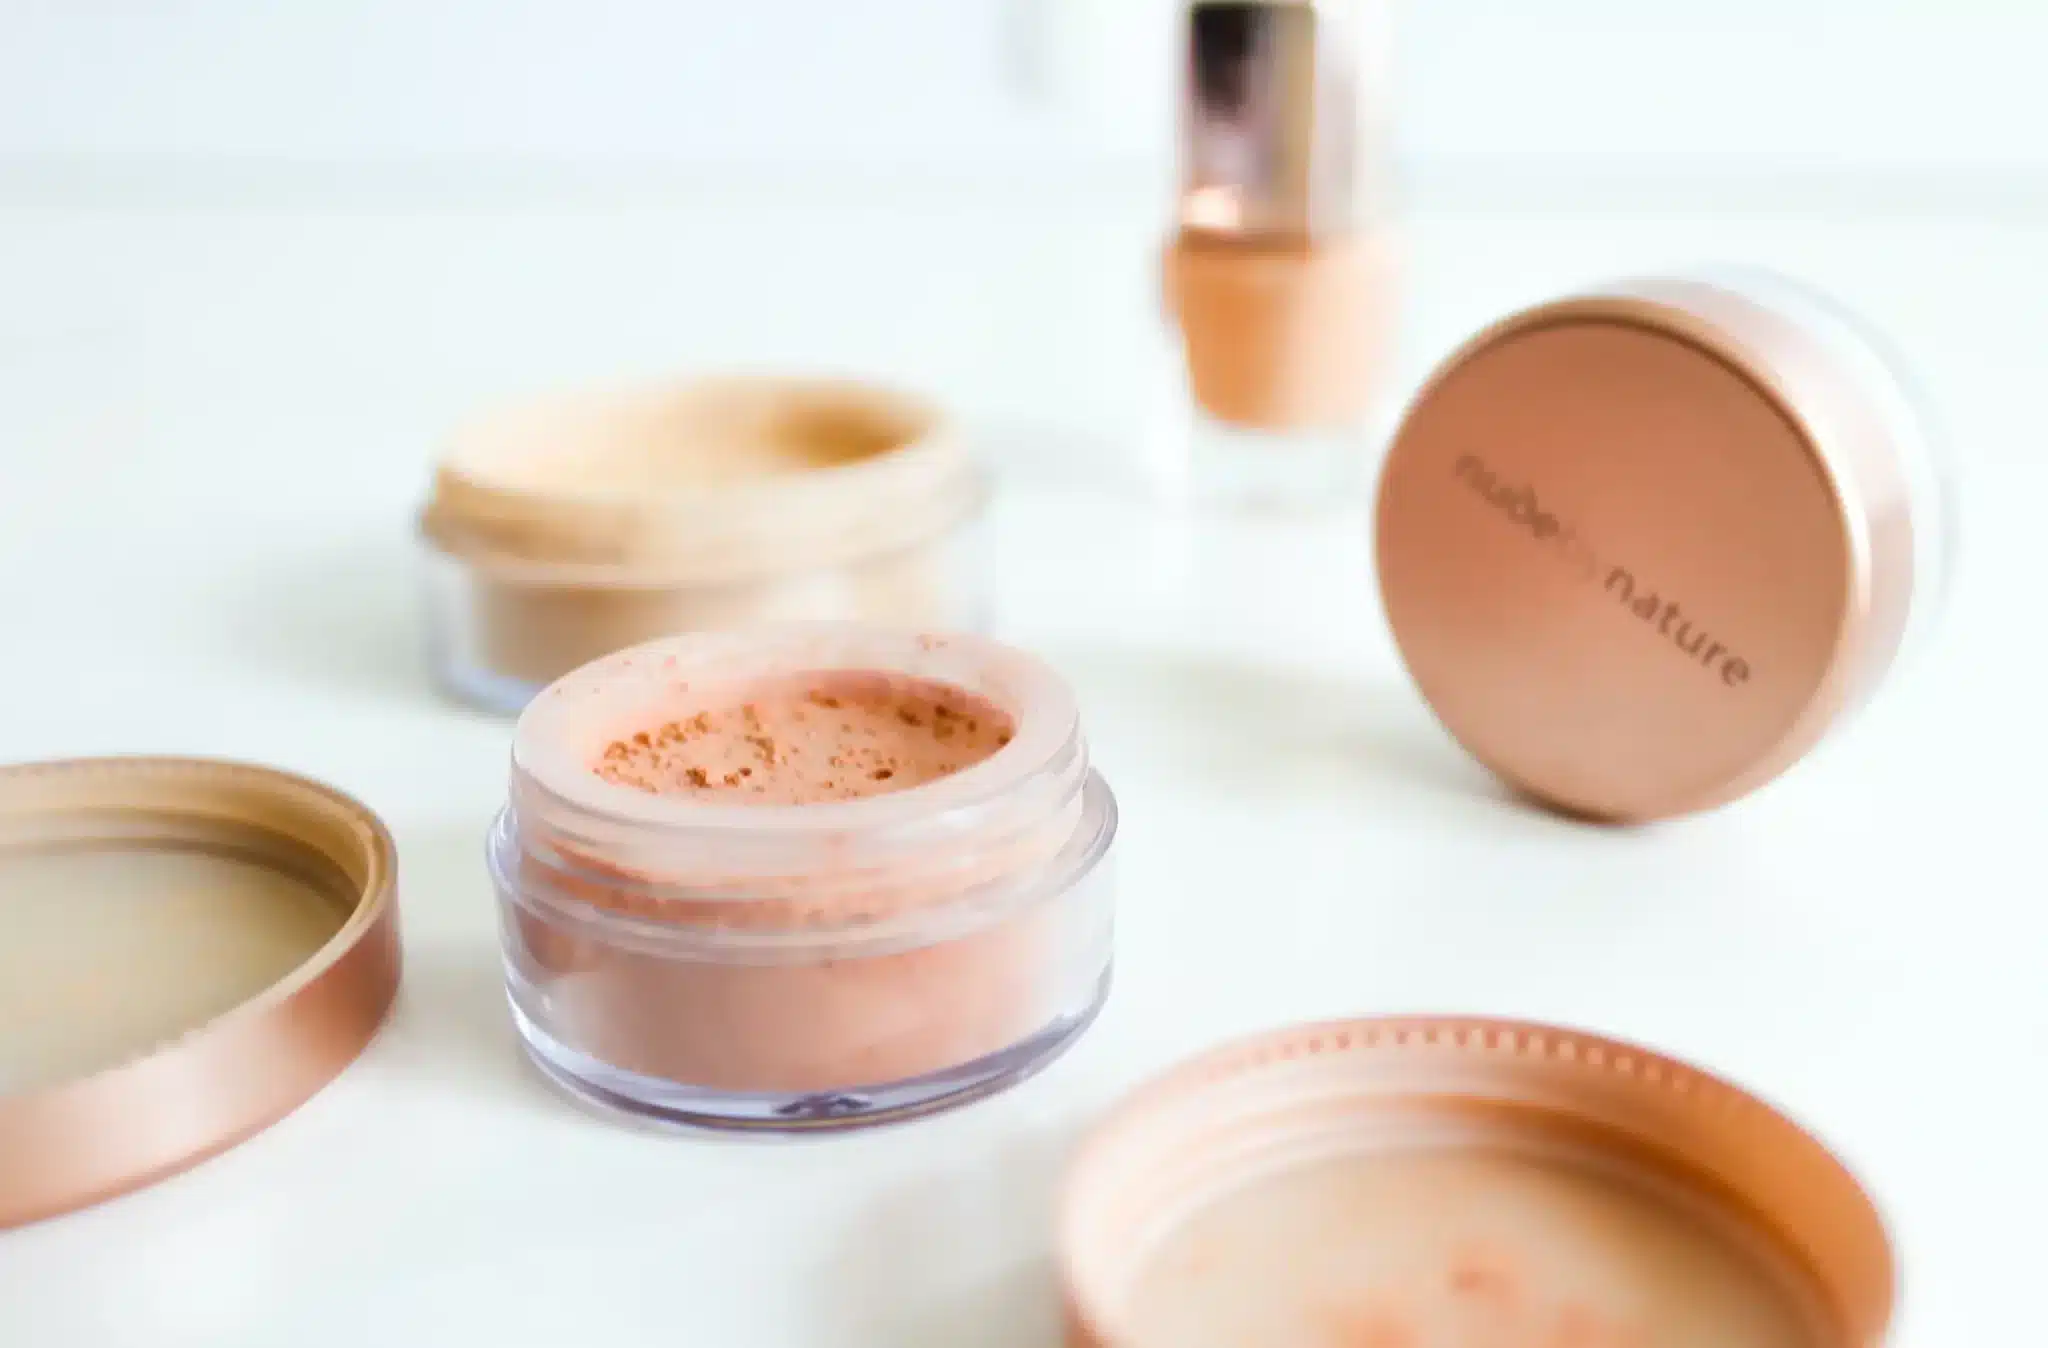 A soft-focused image showcasing an elegant display of cosmetic products with a clear emphasis on natural beauty. In the foreground, an open jar of loose powder in a delicate pink shade sits beside its matching lid, with the brand 'nude by nature' etched on it. The background features a blurred foundation bottle, all set against a crisp white backdrop.